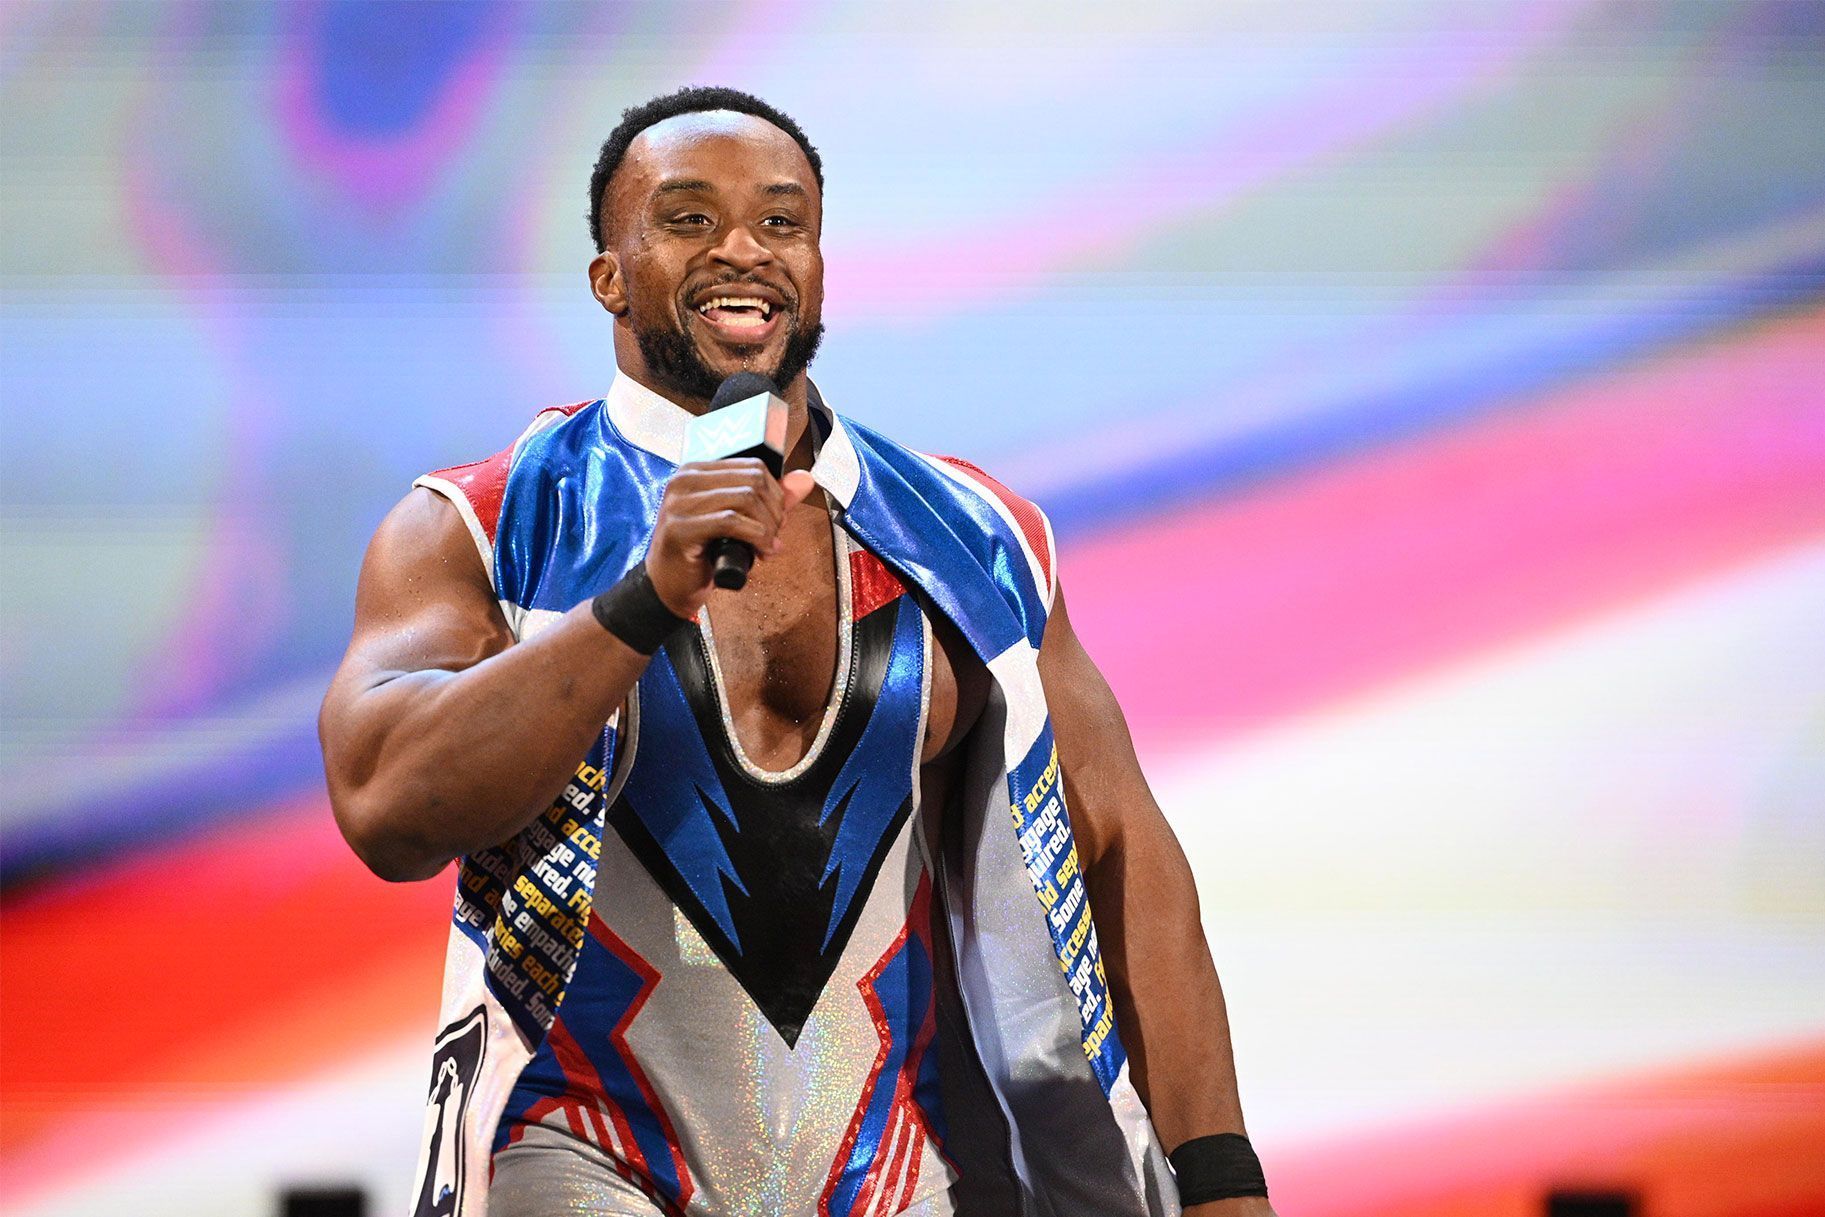 Will the power of positivity bring Big E back to a WWE ring?